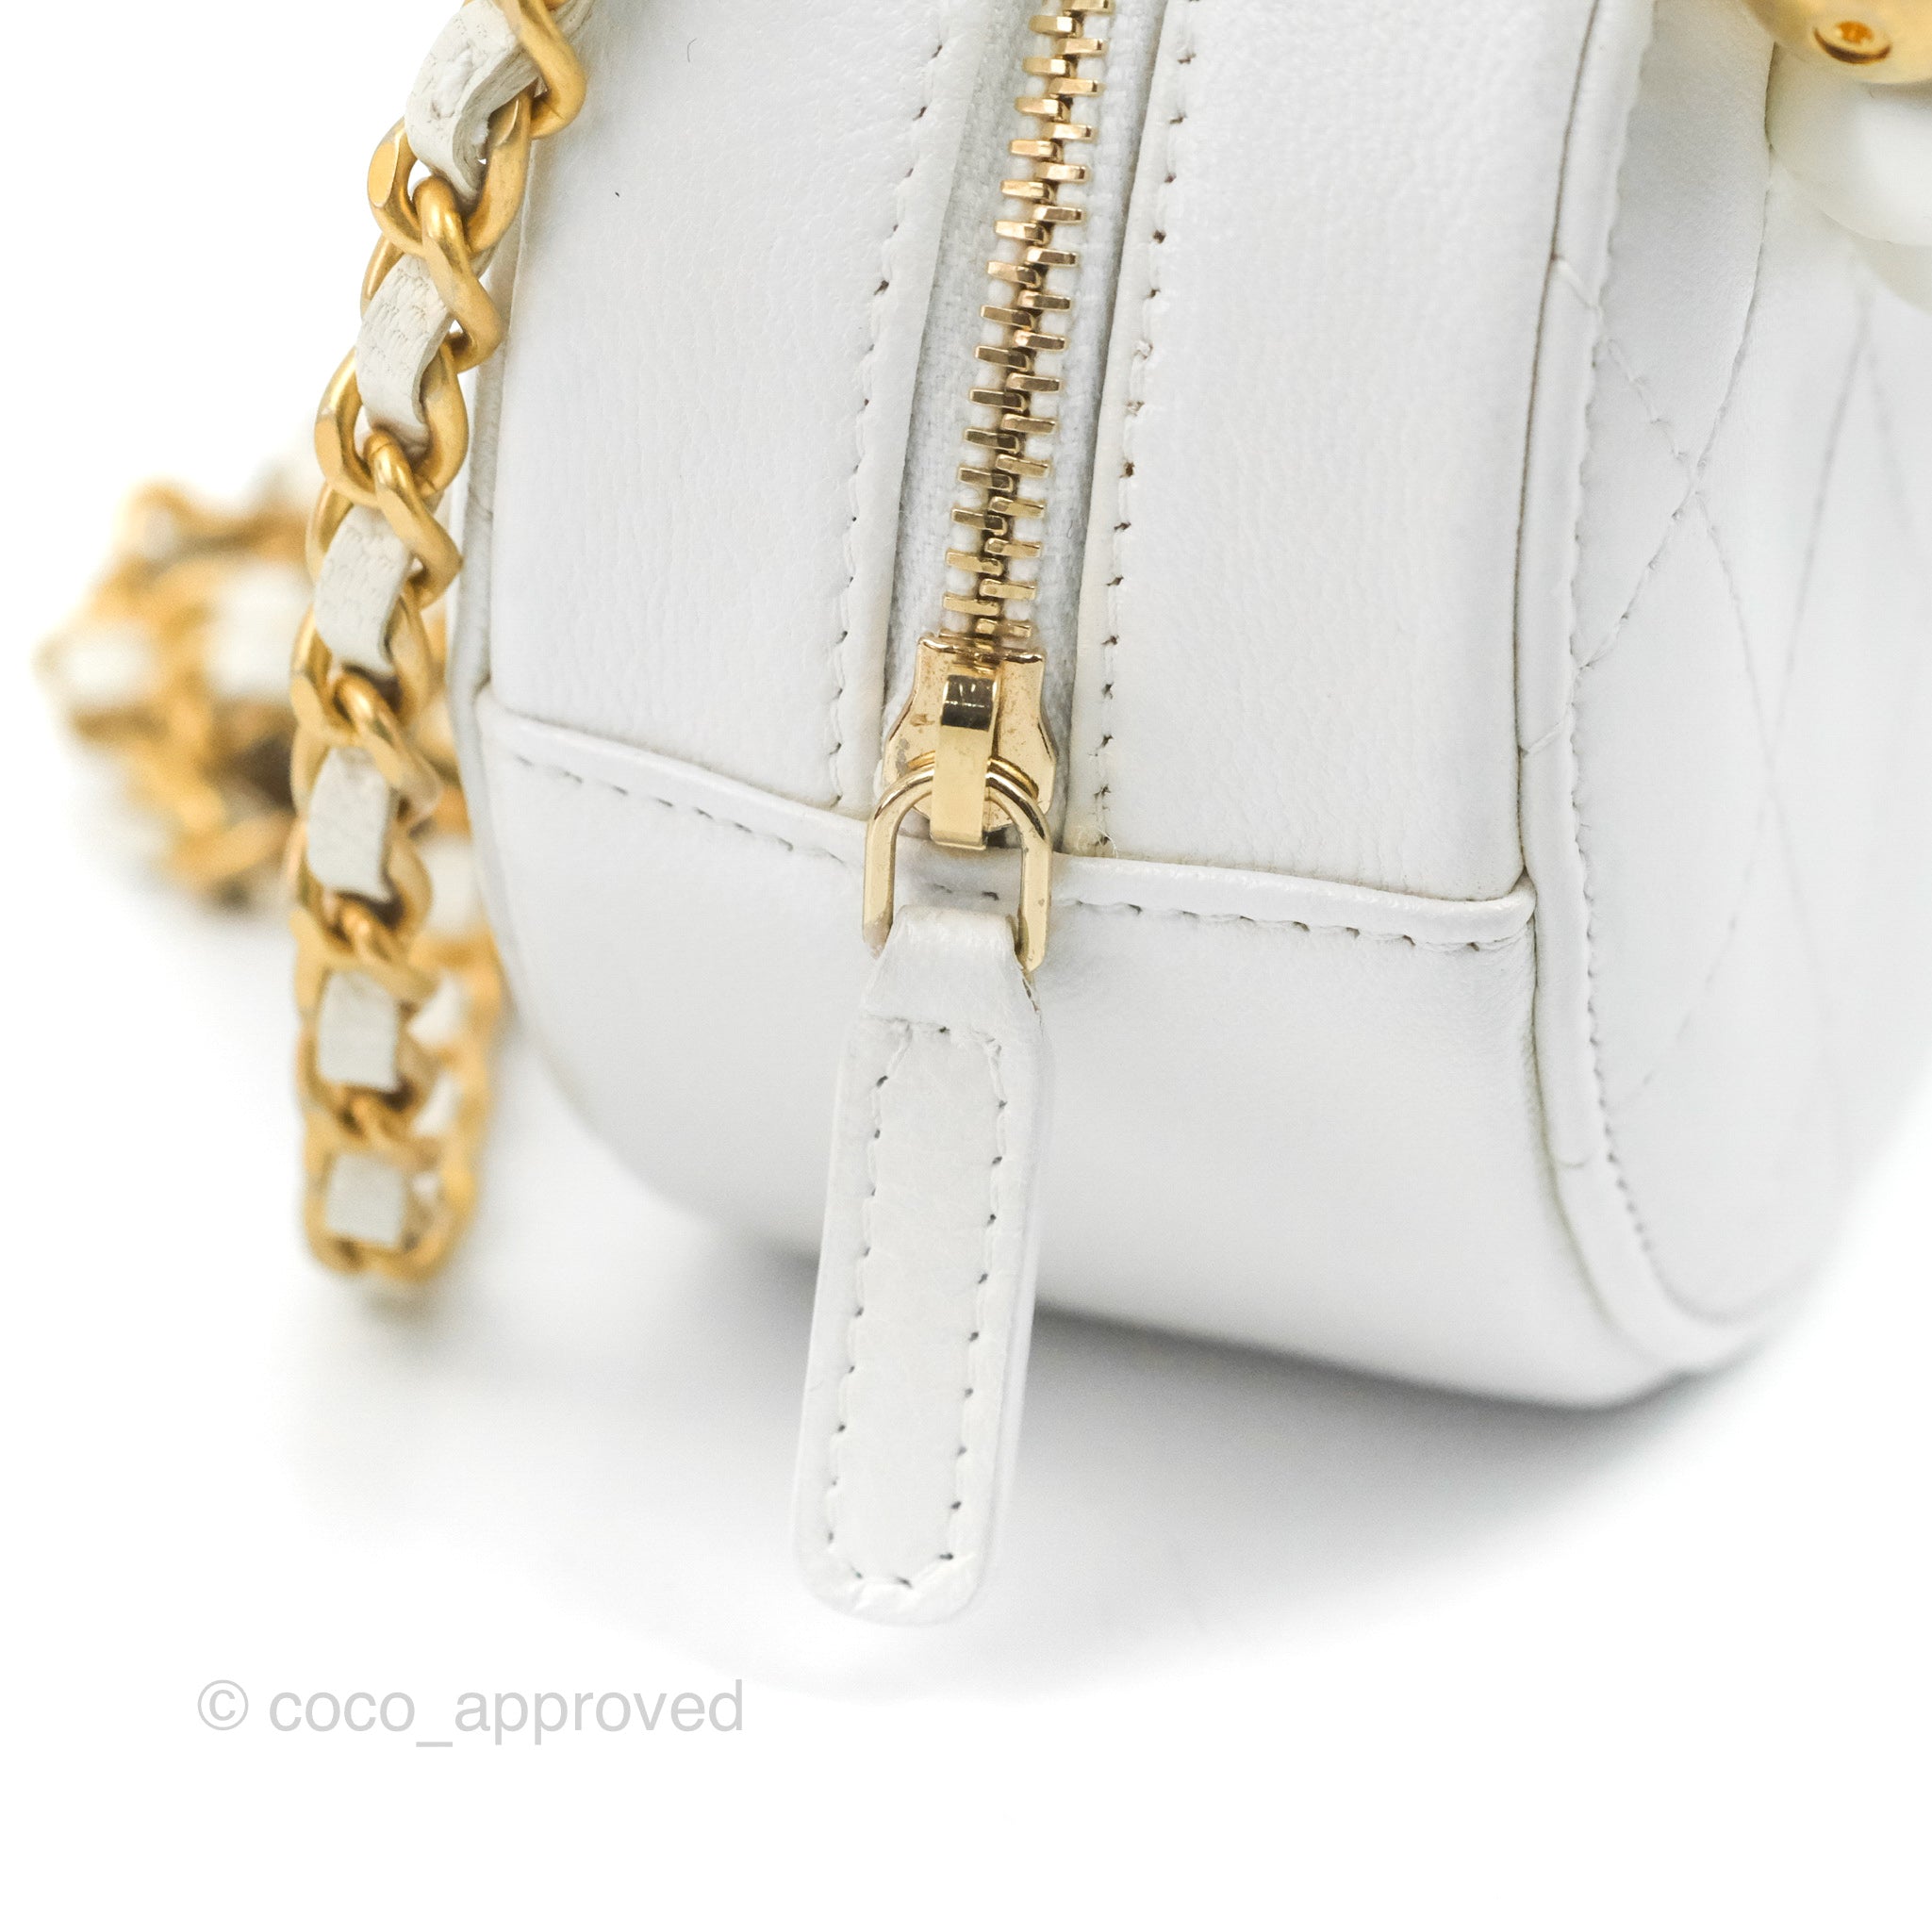 Clutch with chain - Lambskin, imitation pearls & gold-tone metal, white —  Fashion | CHANEL